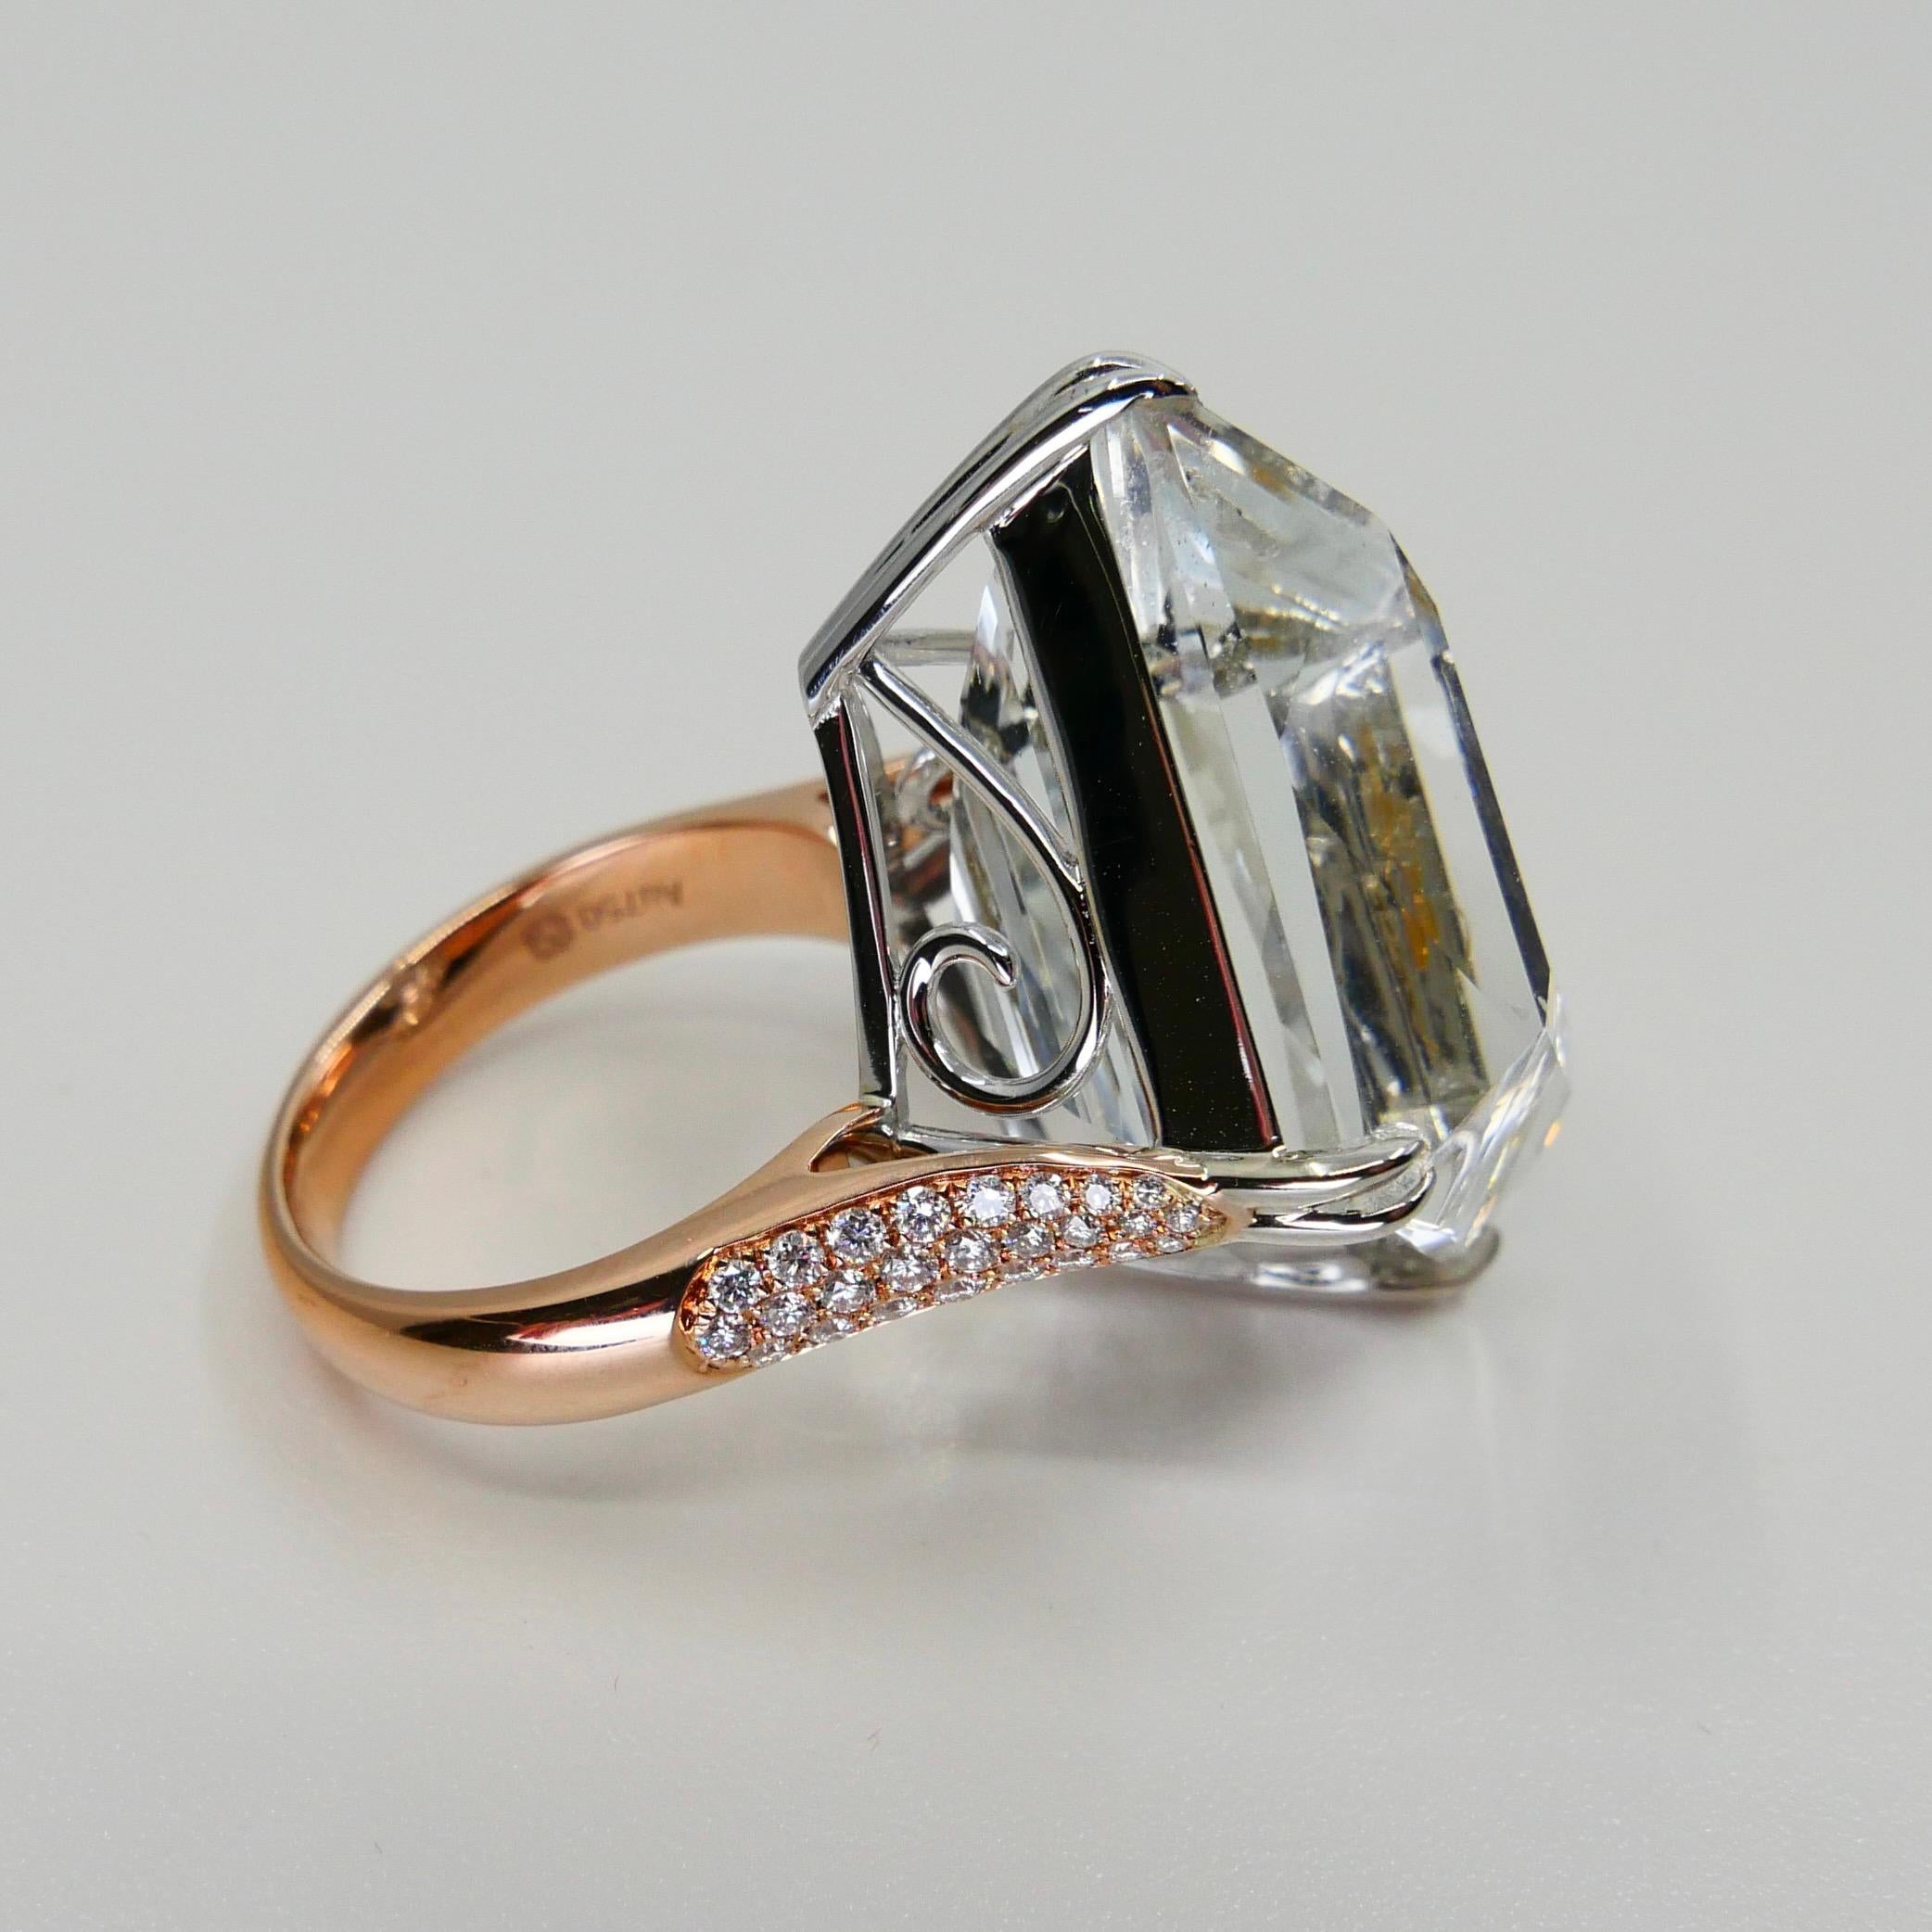 49.02 Carat Kite Step Cut White Topaz and Diamond Cocktail Ring, Massive For Sale 9